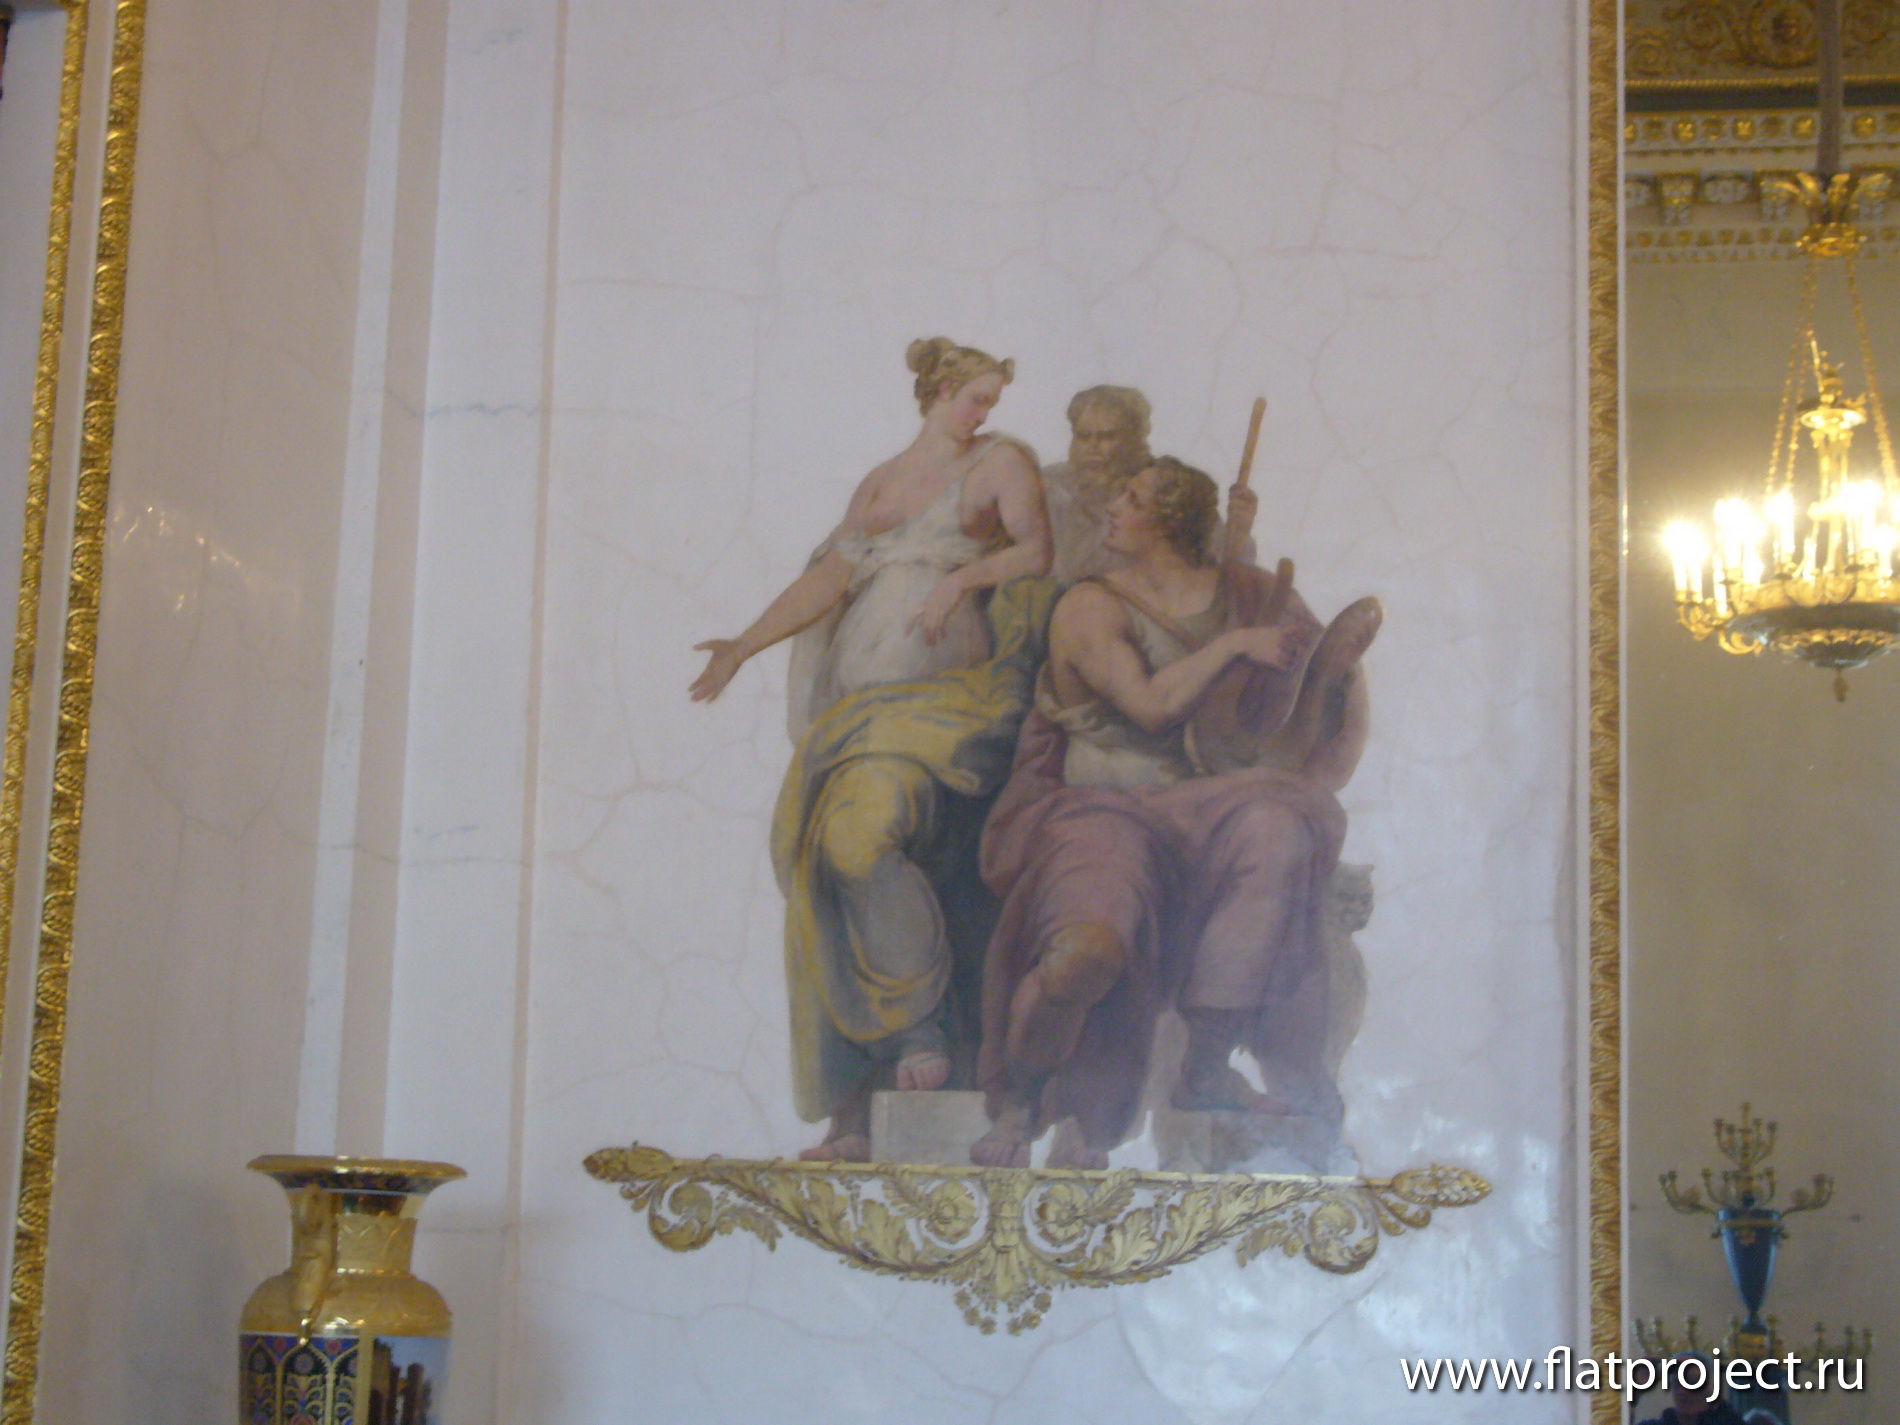 The State Russian museum interiors – photo 95